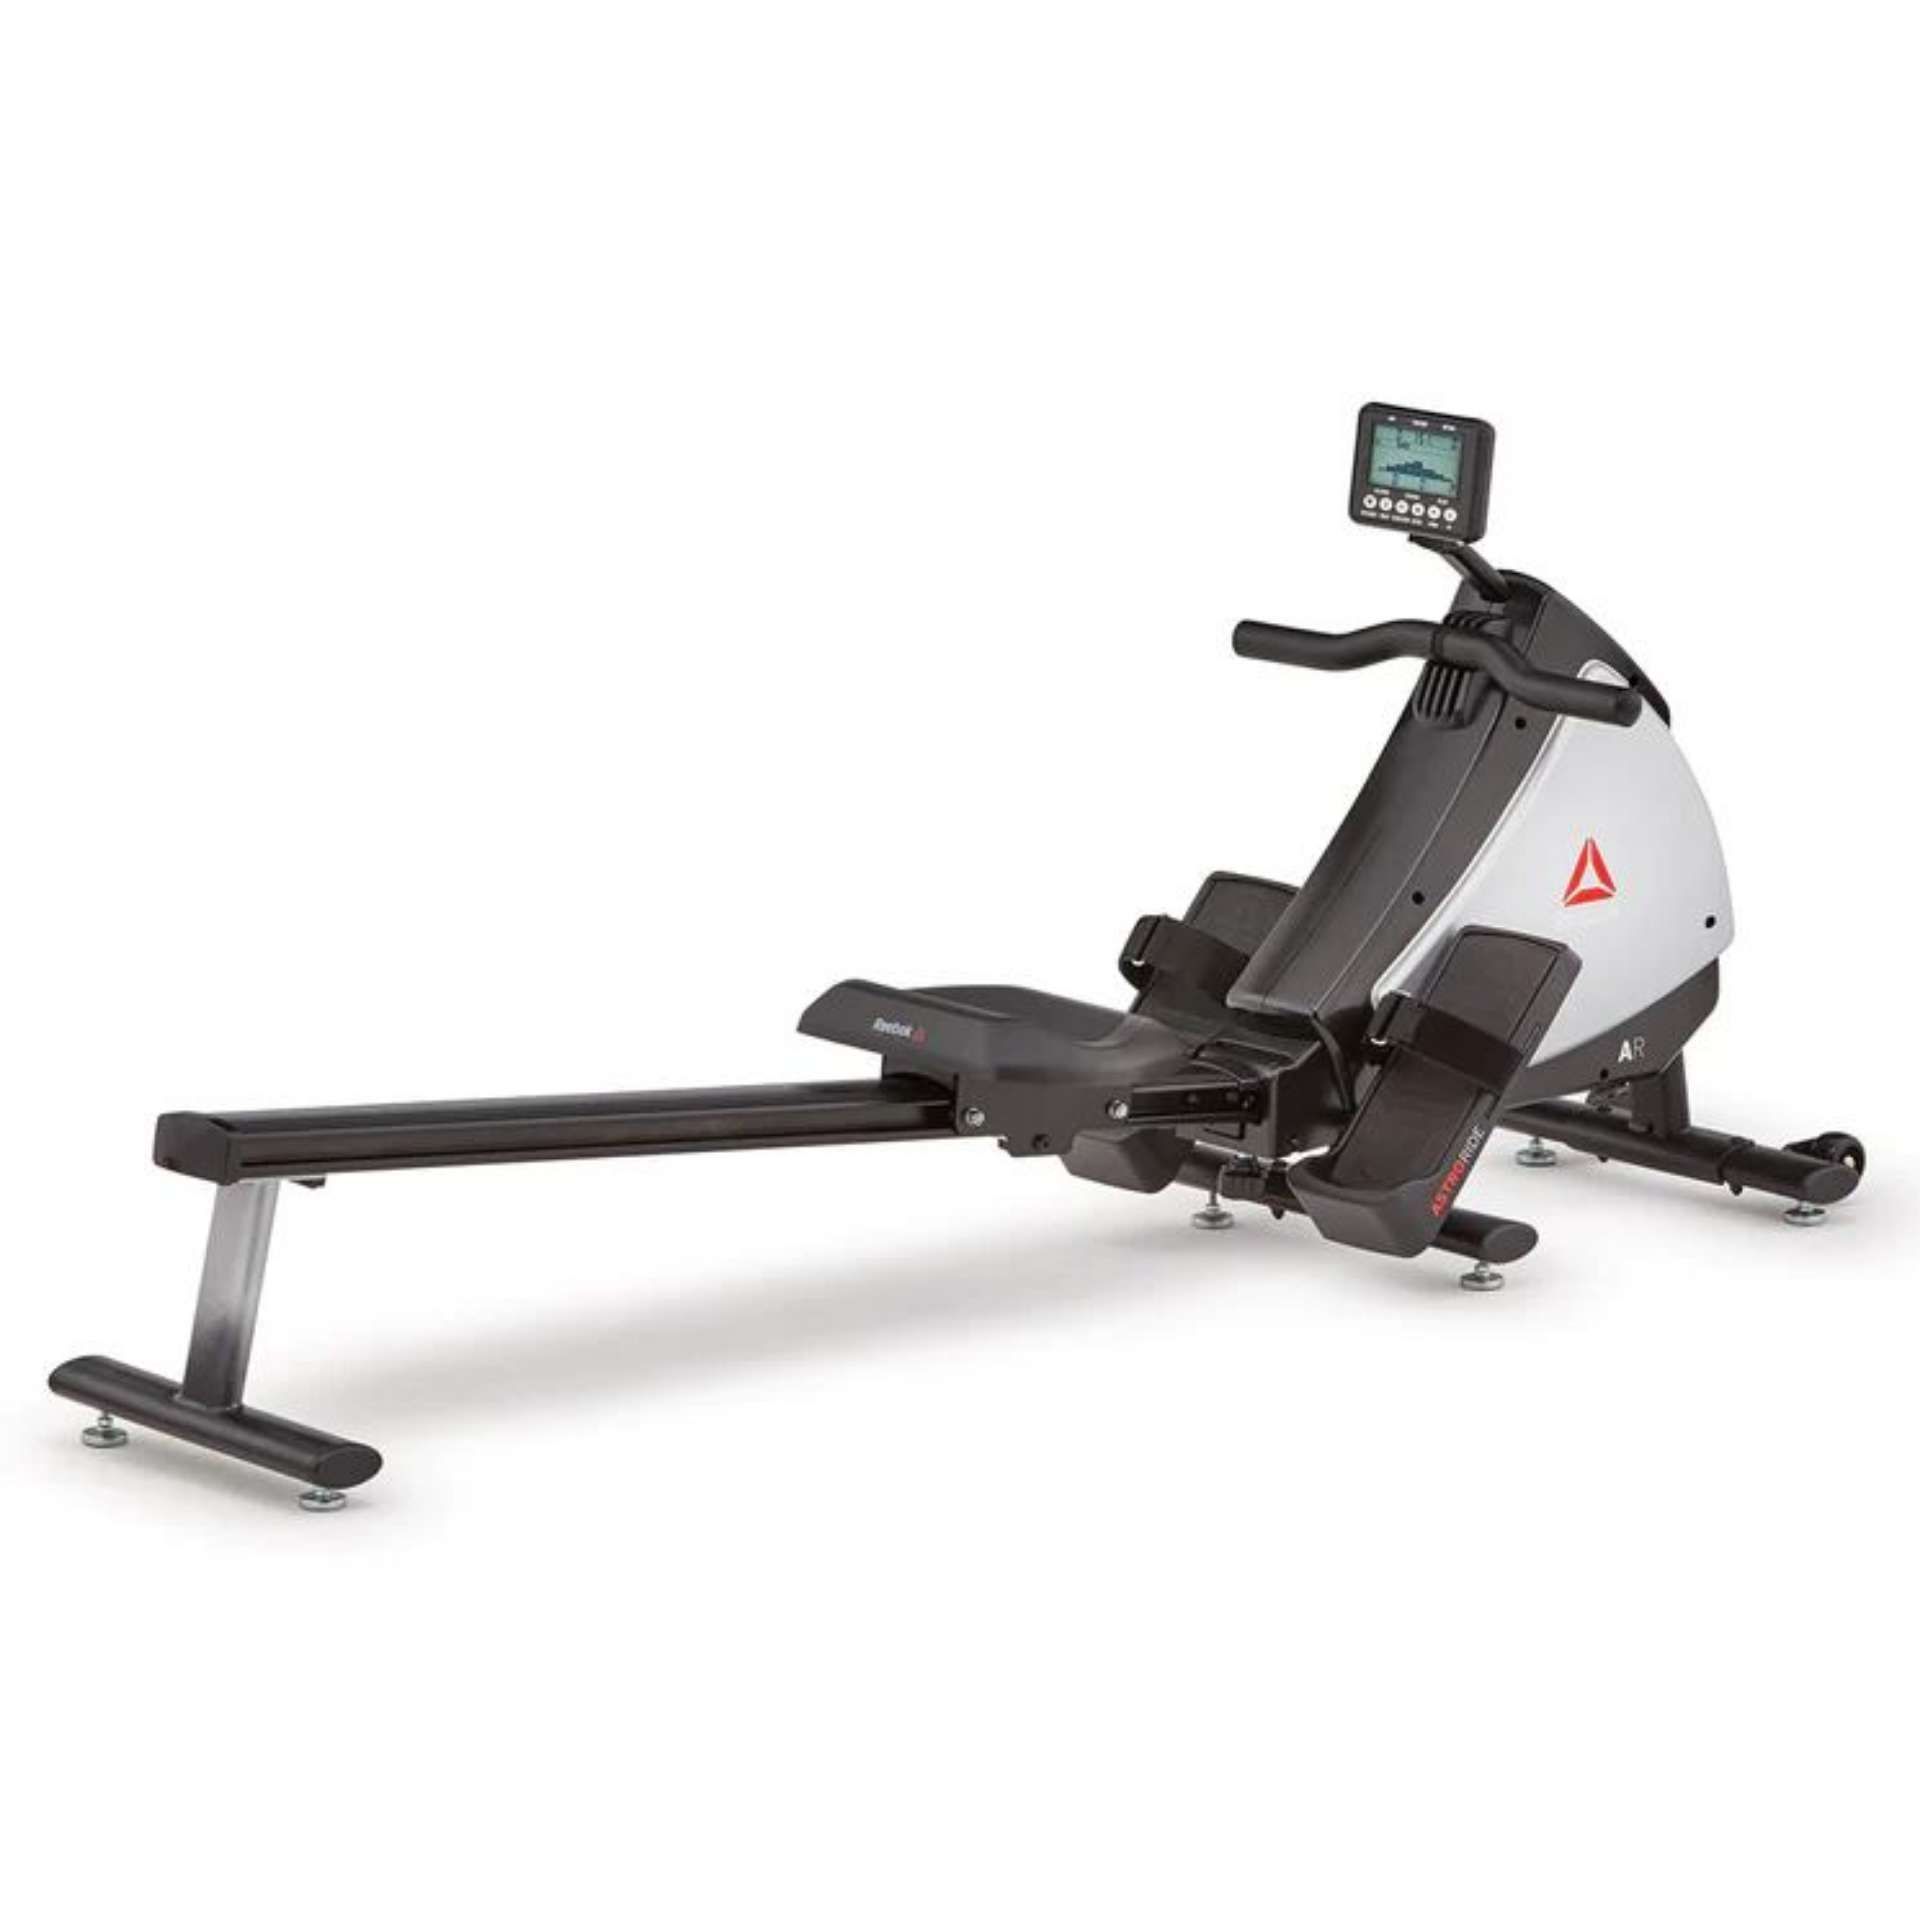 BRAND NEW REEBOK AR Rower. RRP £514.99 EACH R18-2. Designed for you to create more effective and - Image 3 of 4